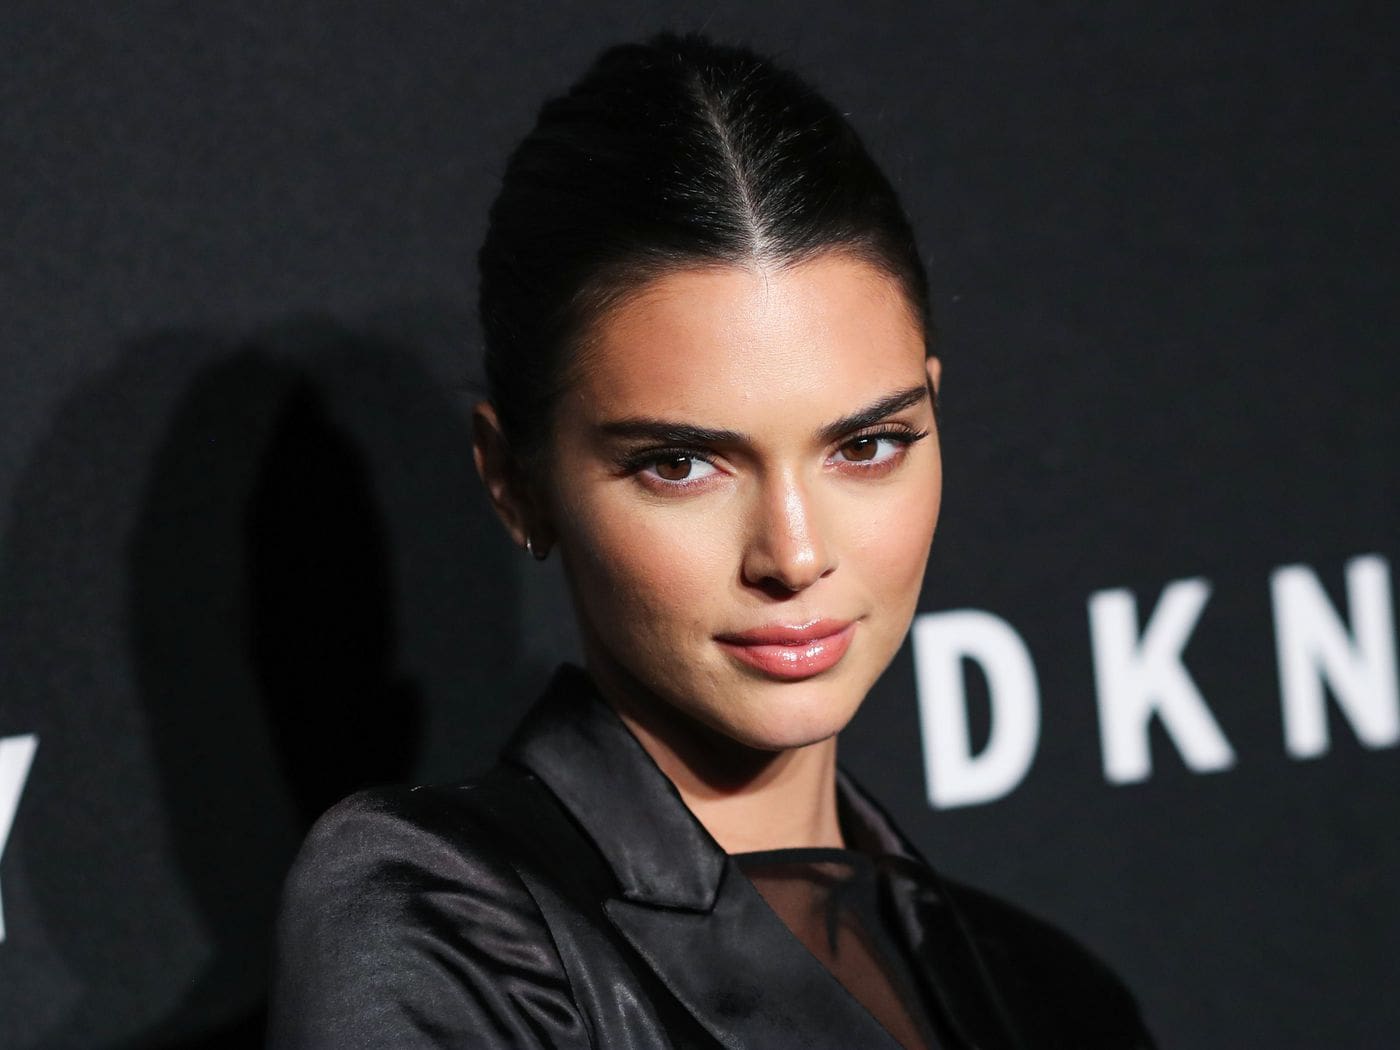 kuwtk-kendall-jenners-pout-looks-a-lot-like-her-sister-kylies-in-new-video-did-she-get-them-done-as-well